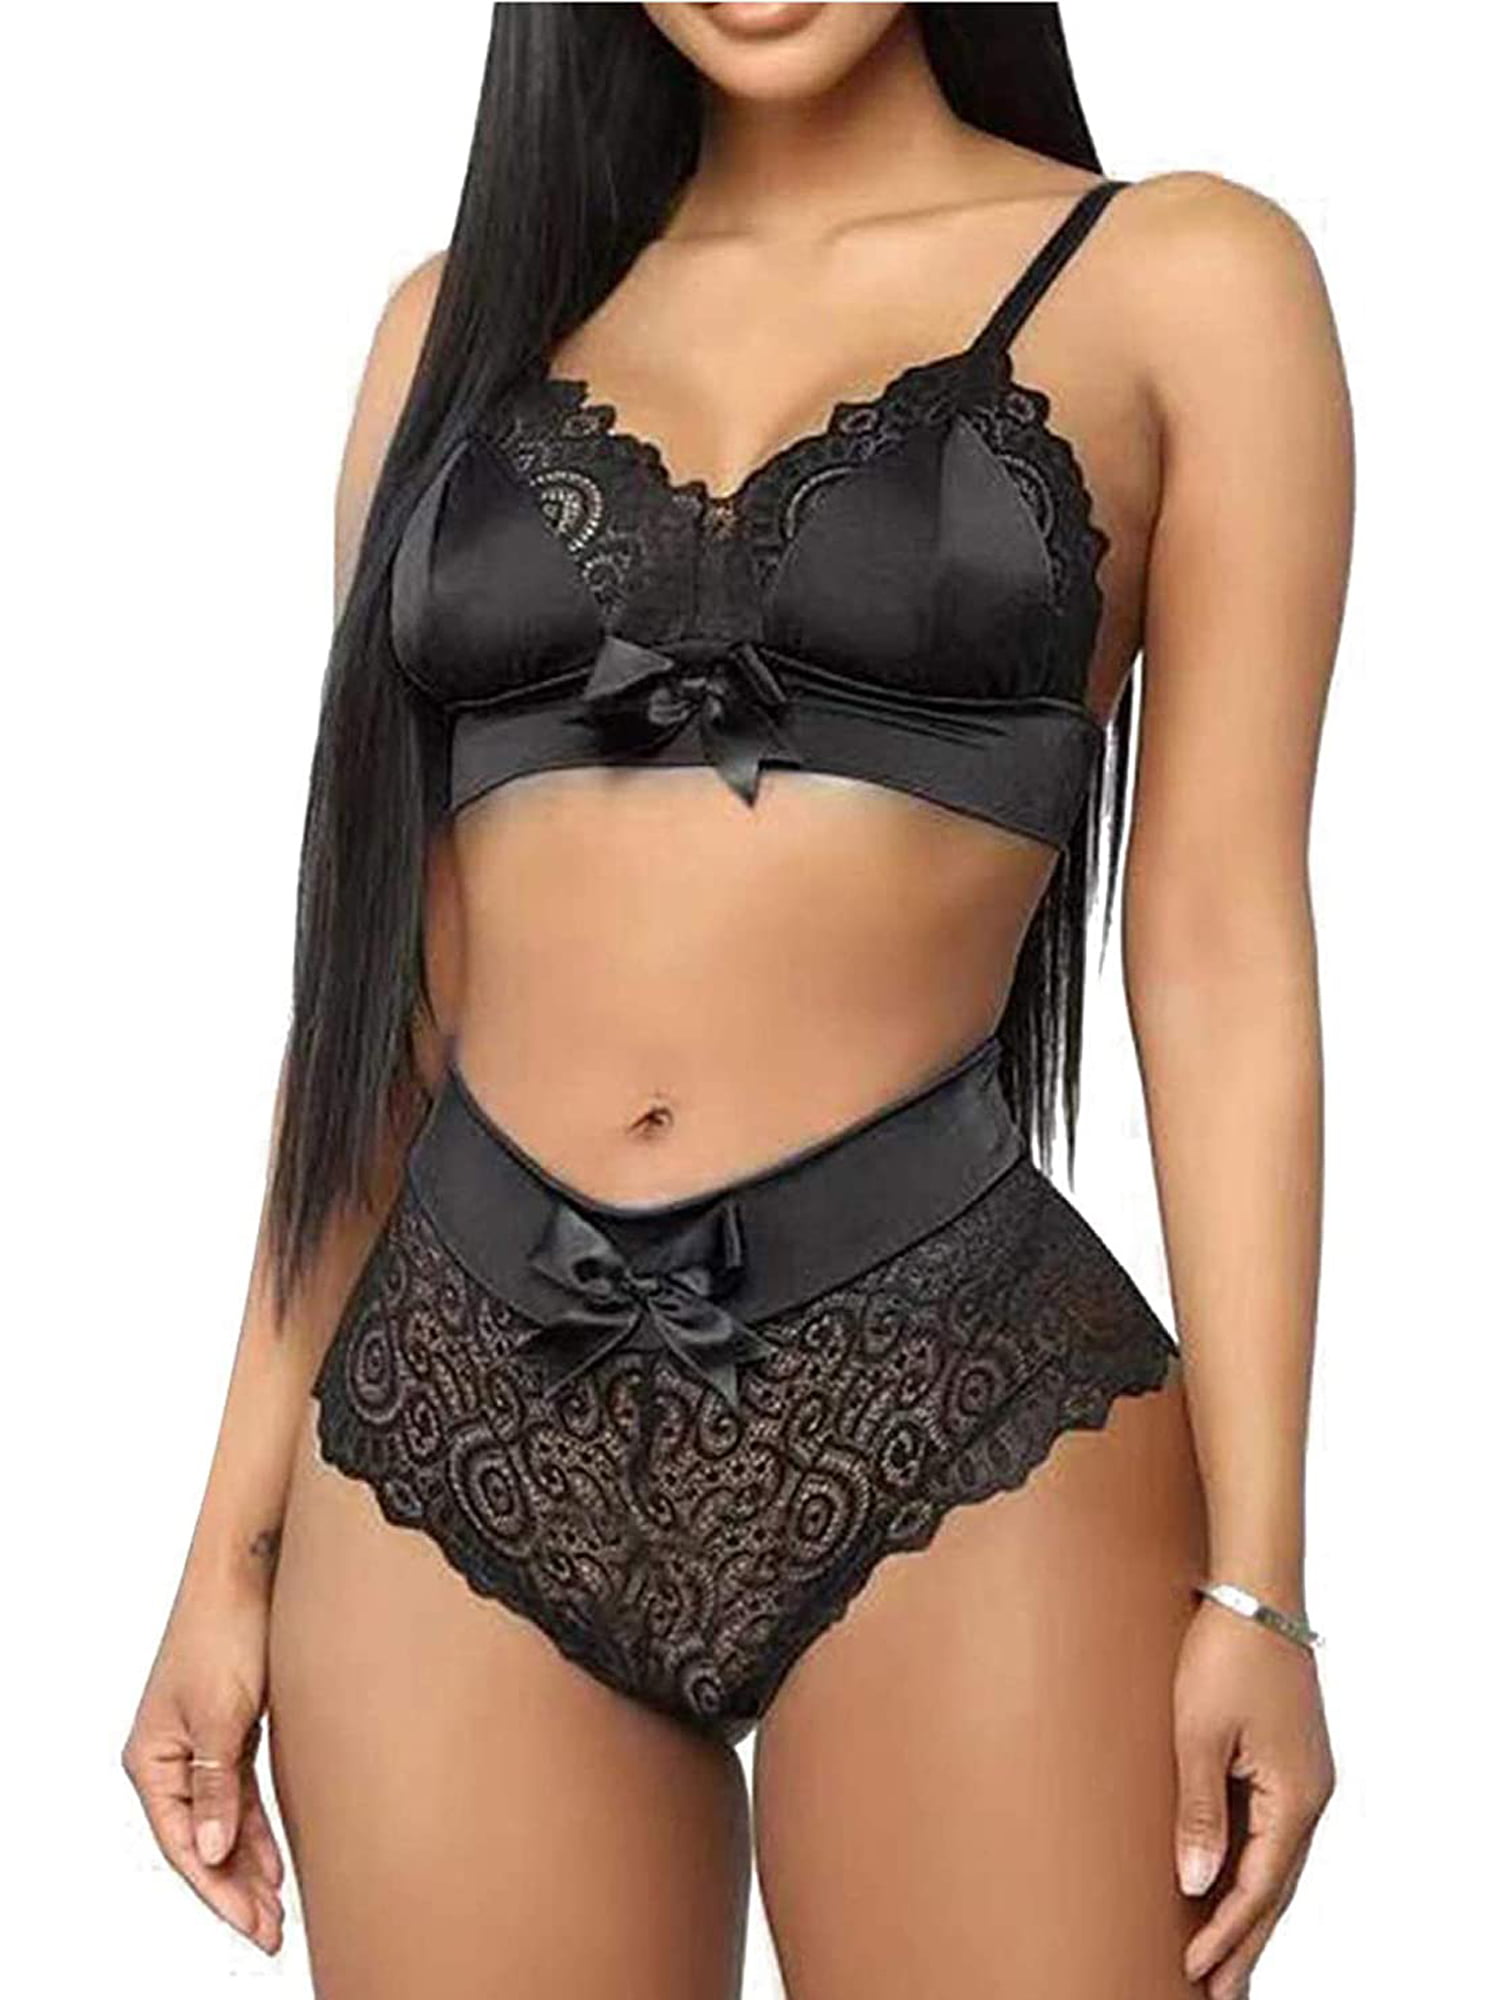 Women Lace Perspective Nightdress Underwear Bras And Panties Suit Sexy Push  Up Bustier Lace See Through Bras